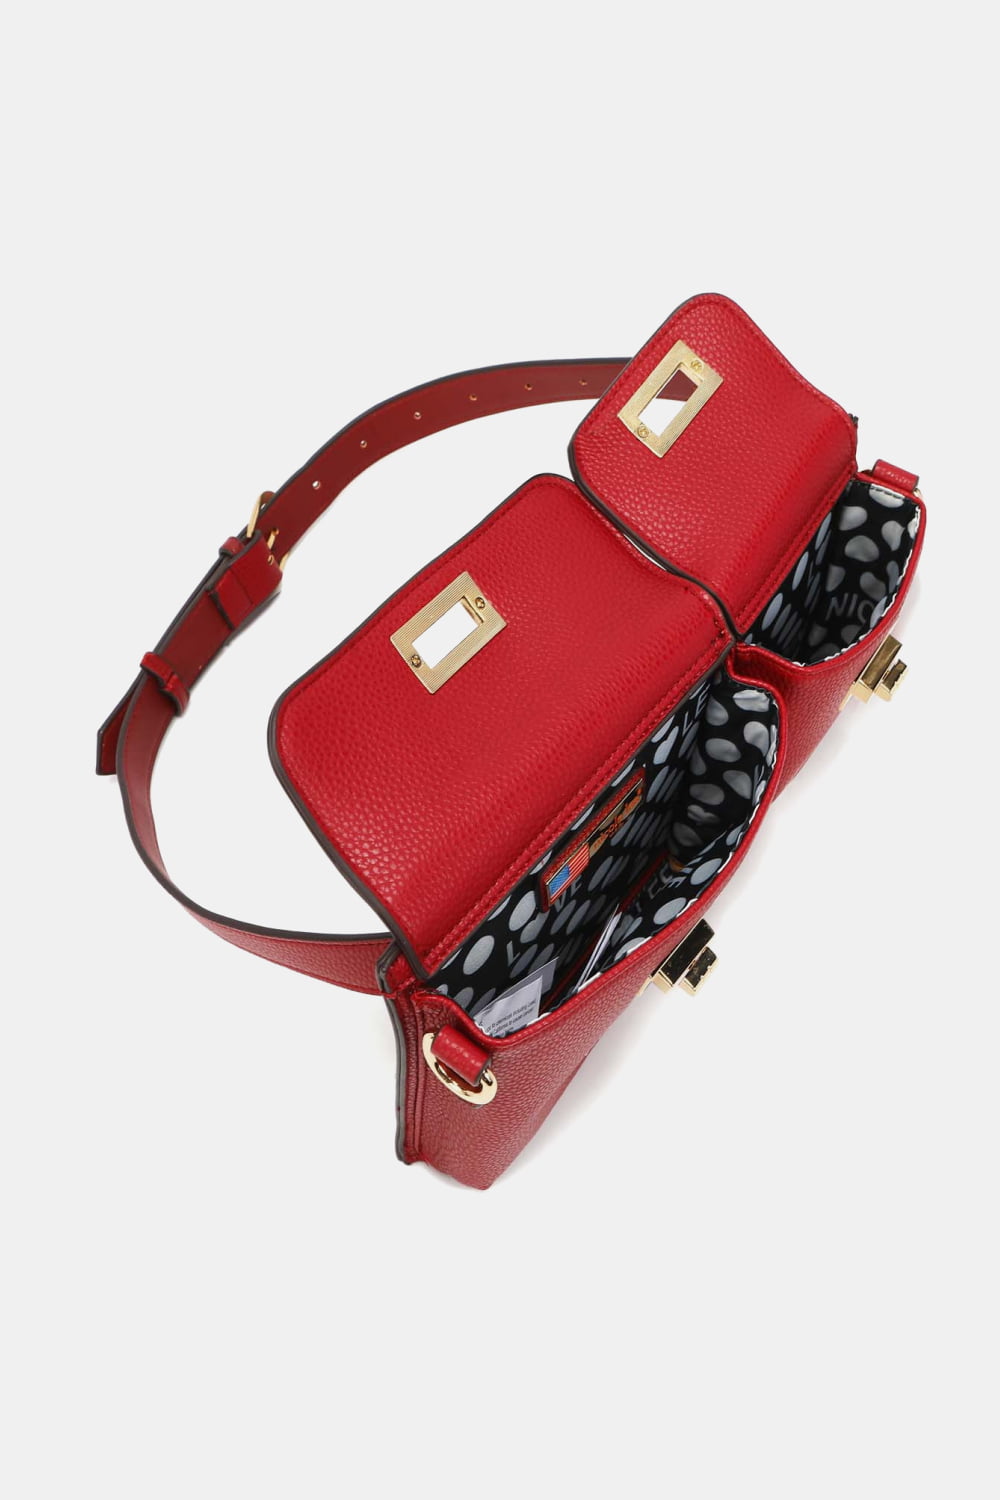 In the Know Multi-Pocket Fanny Pack in Mocha, Red & Black